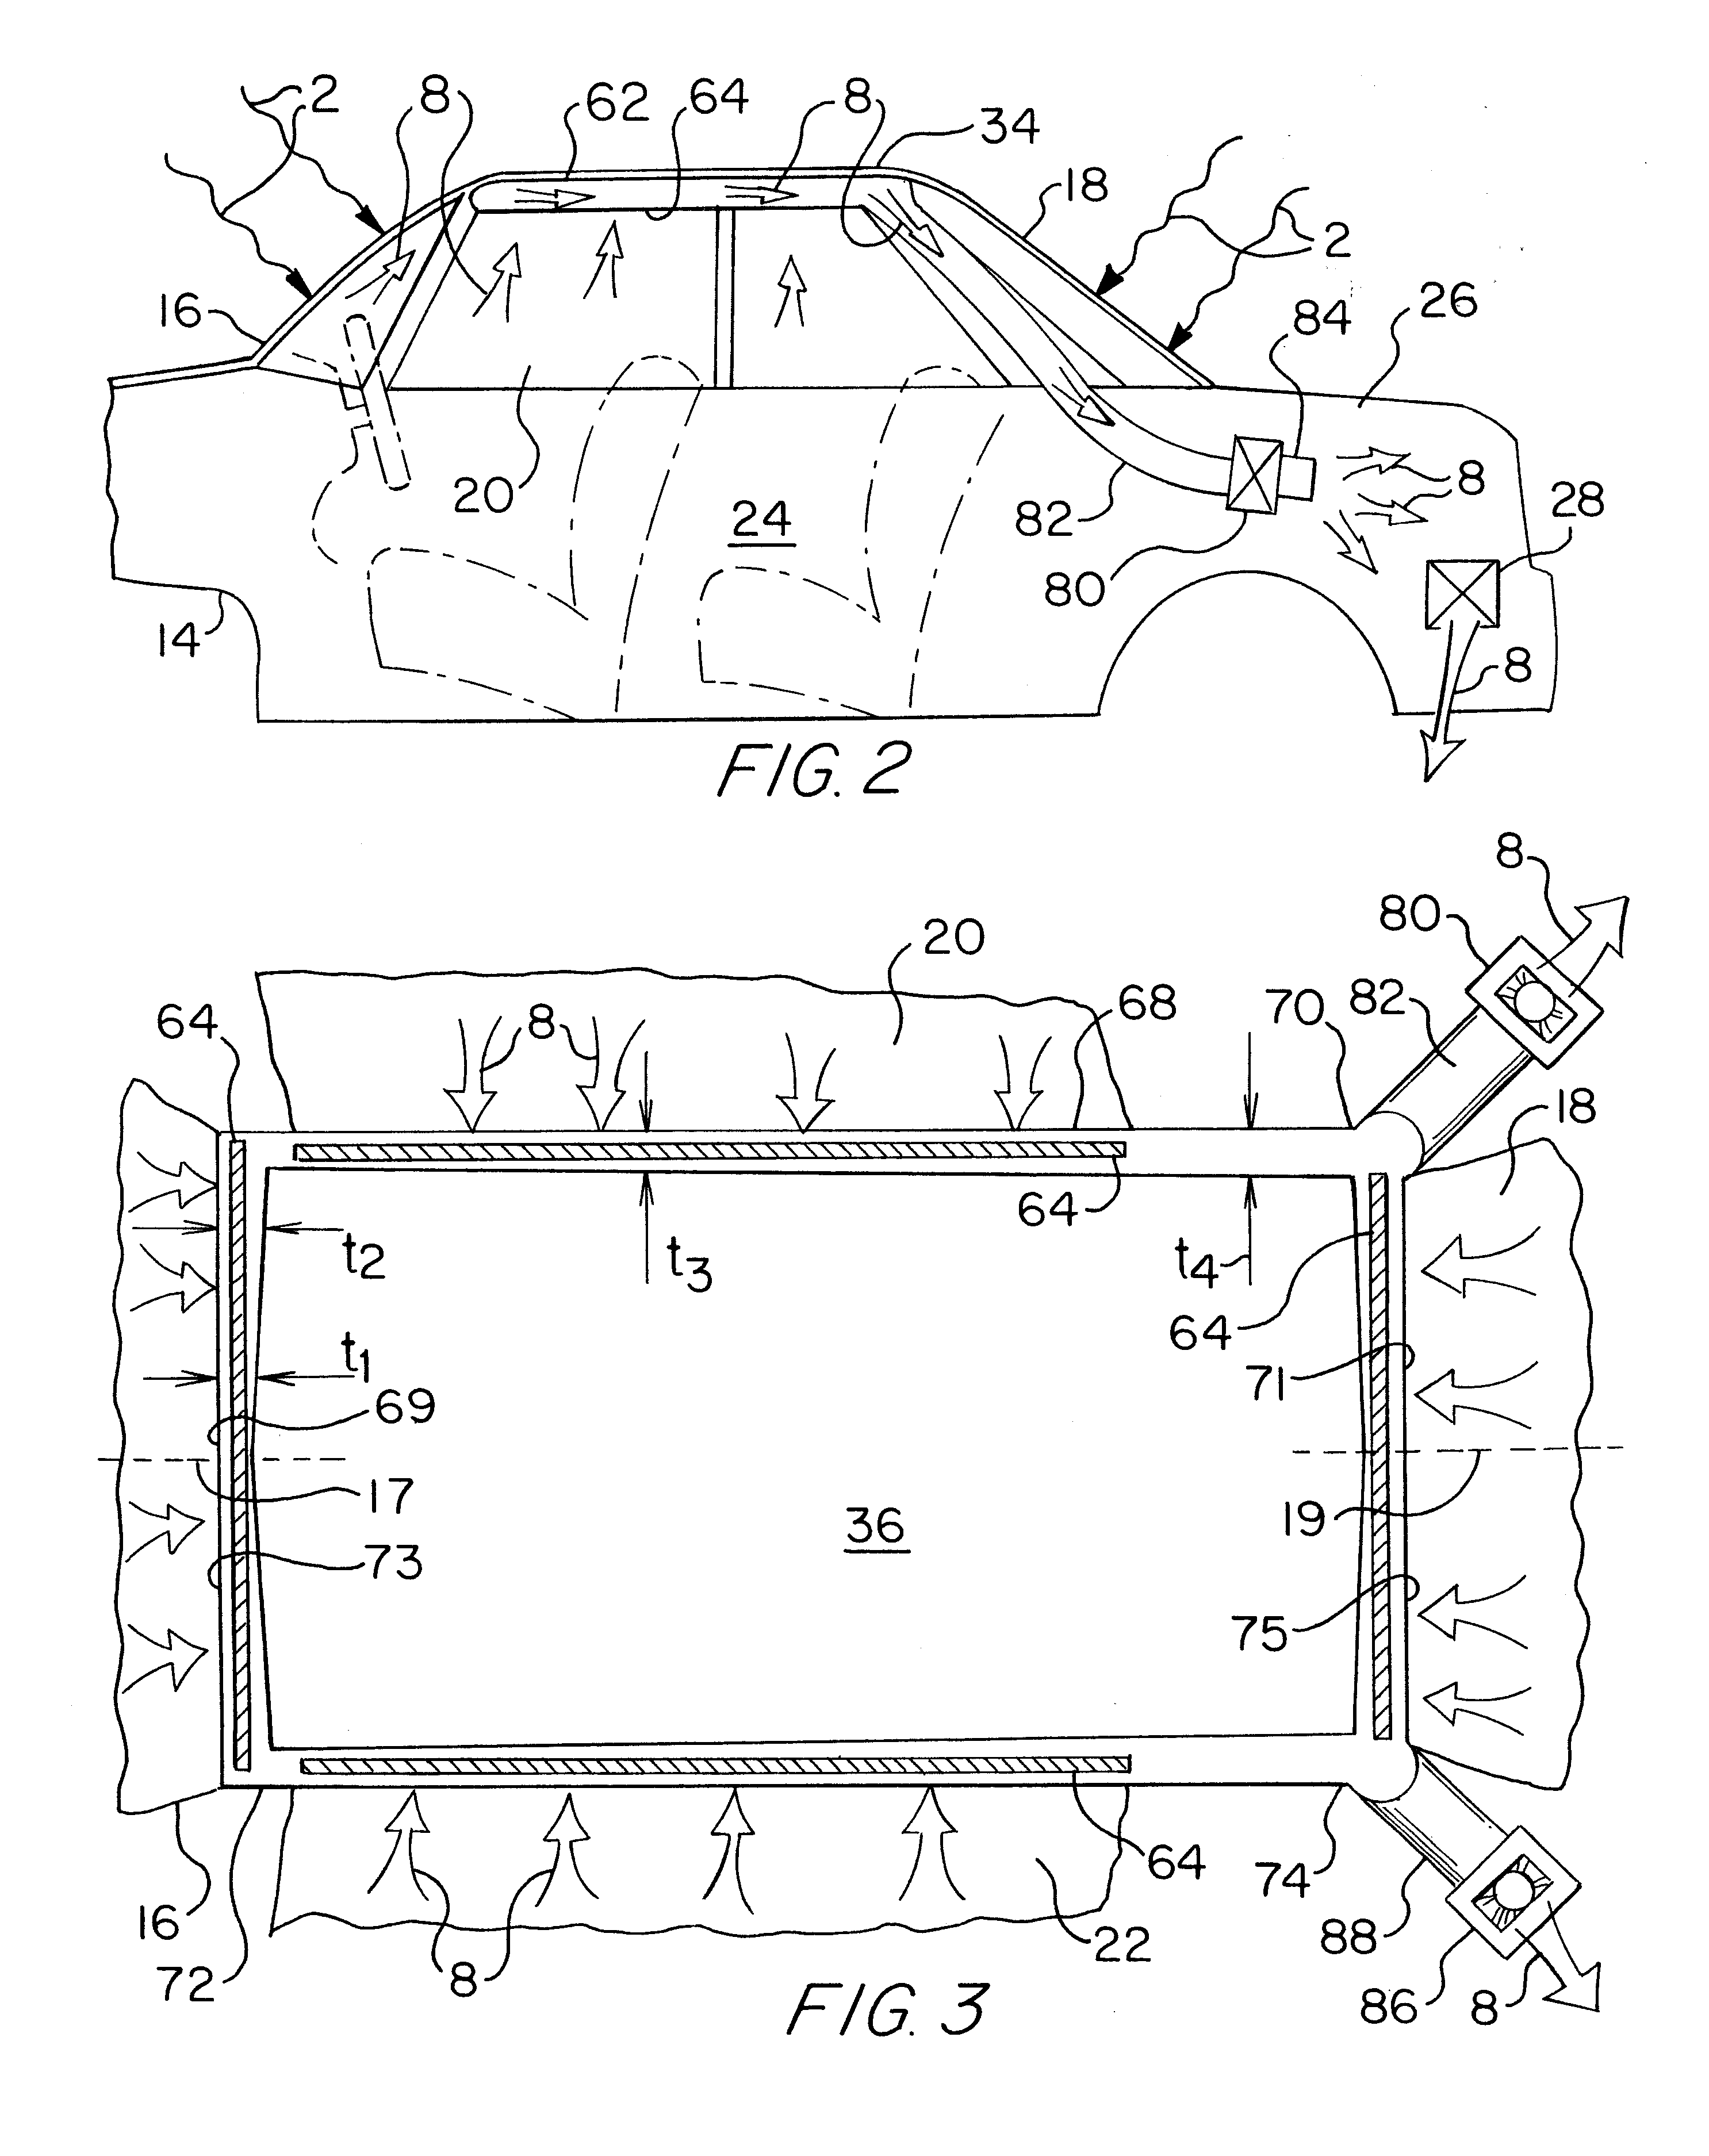 Vehicle cabin cooling system for capturing and exhausting heated boundary layer air from inner surfaces of solar heated windows